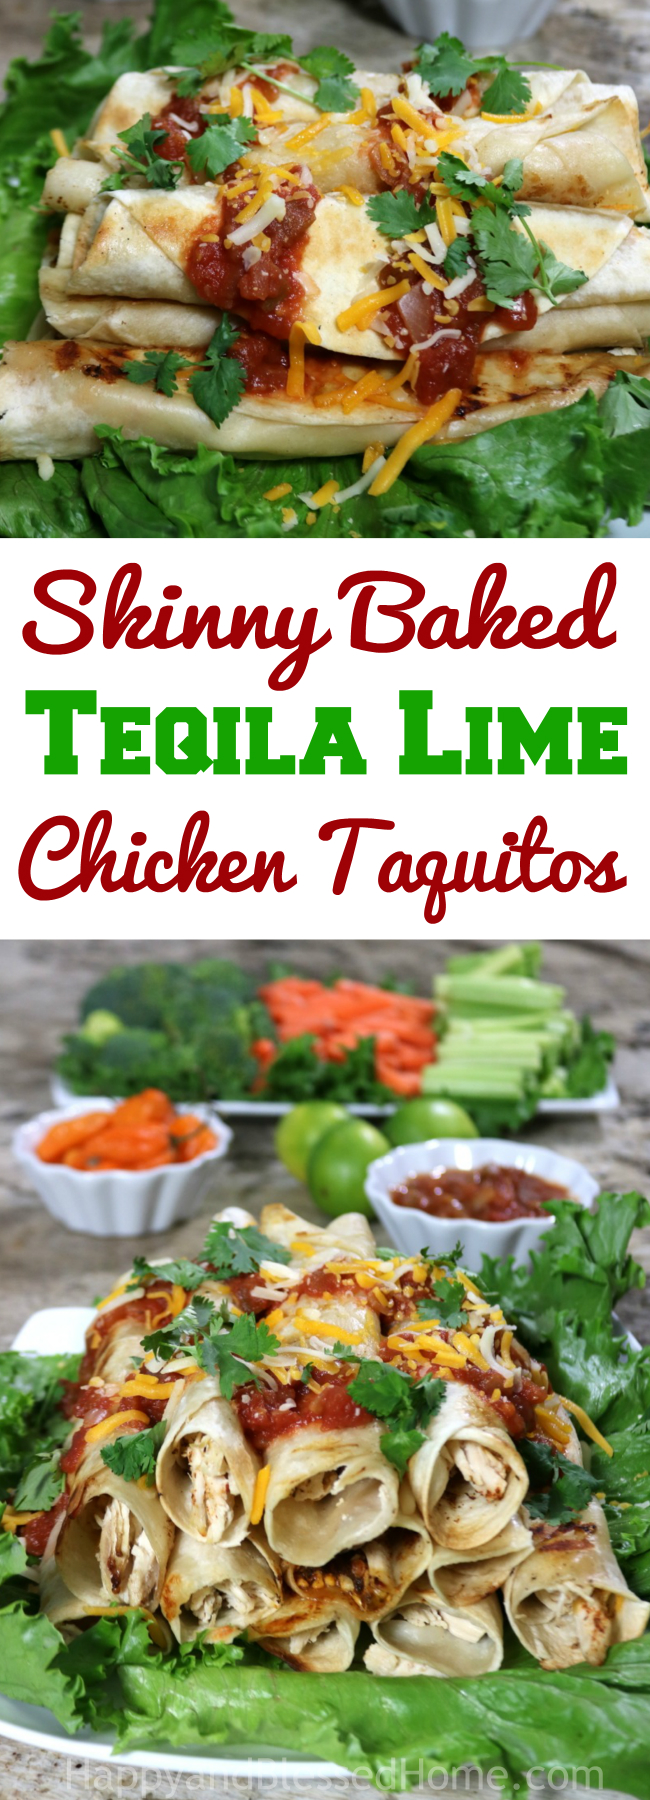 Ugh - so melt in your mouth good! Skinny Baked Tequila Lime Chicken Taquitos - my husband loved these!